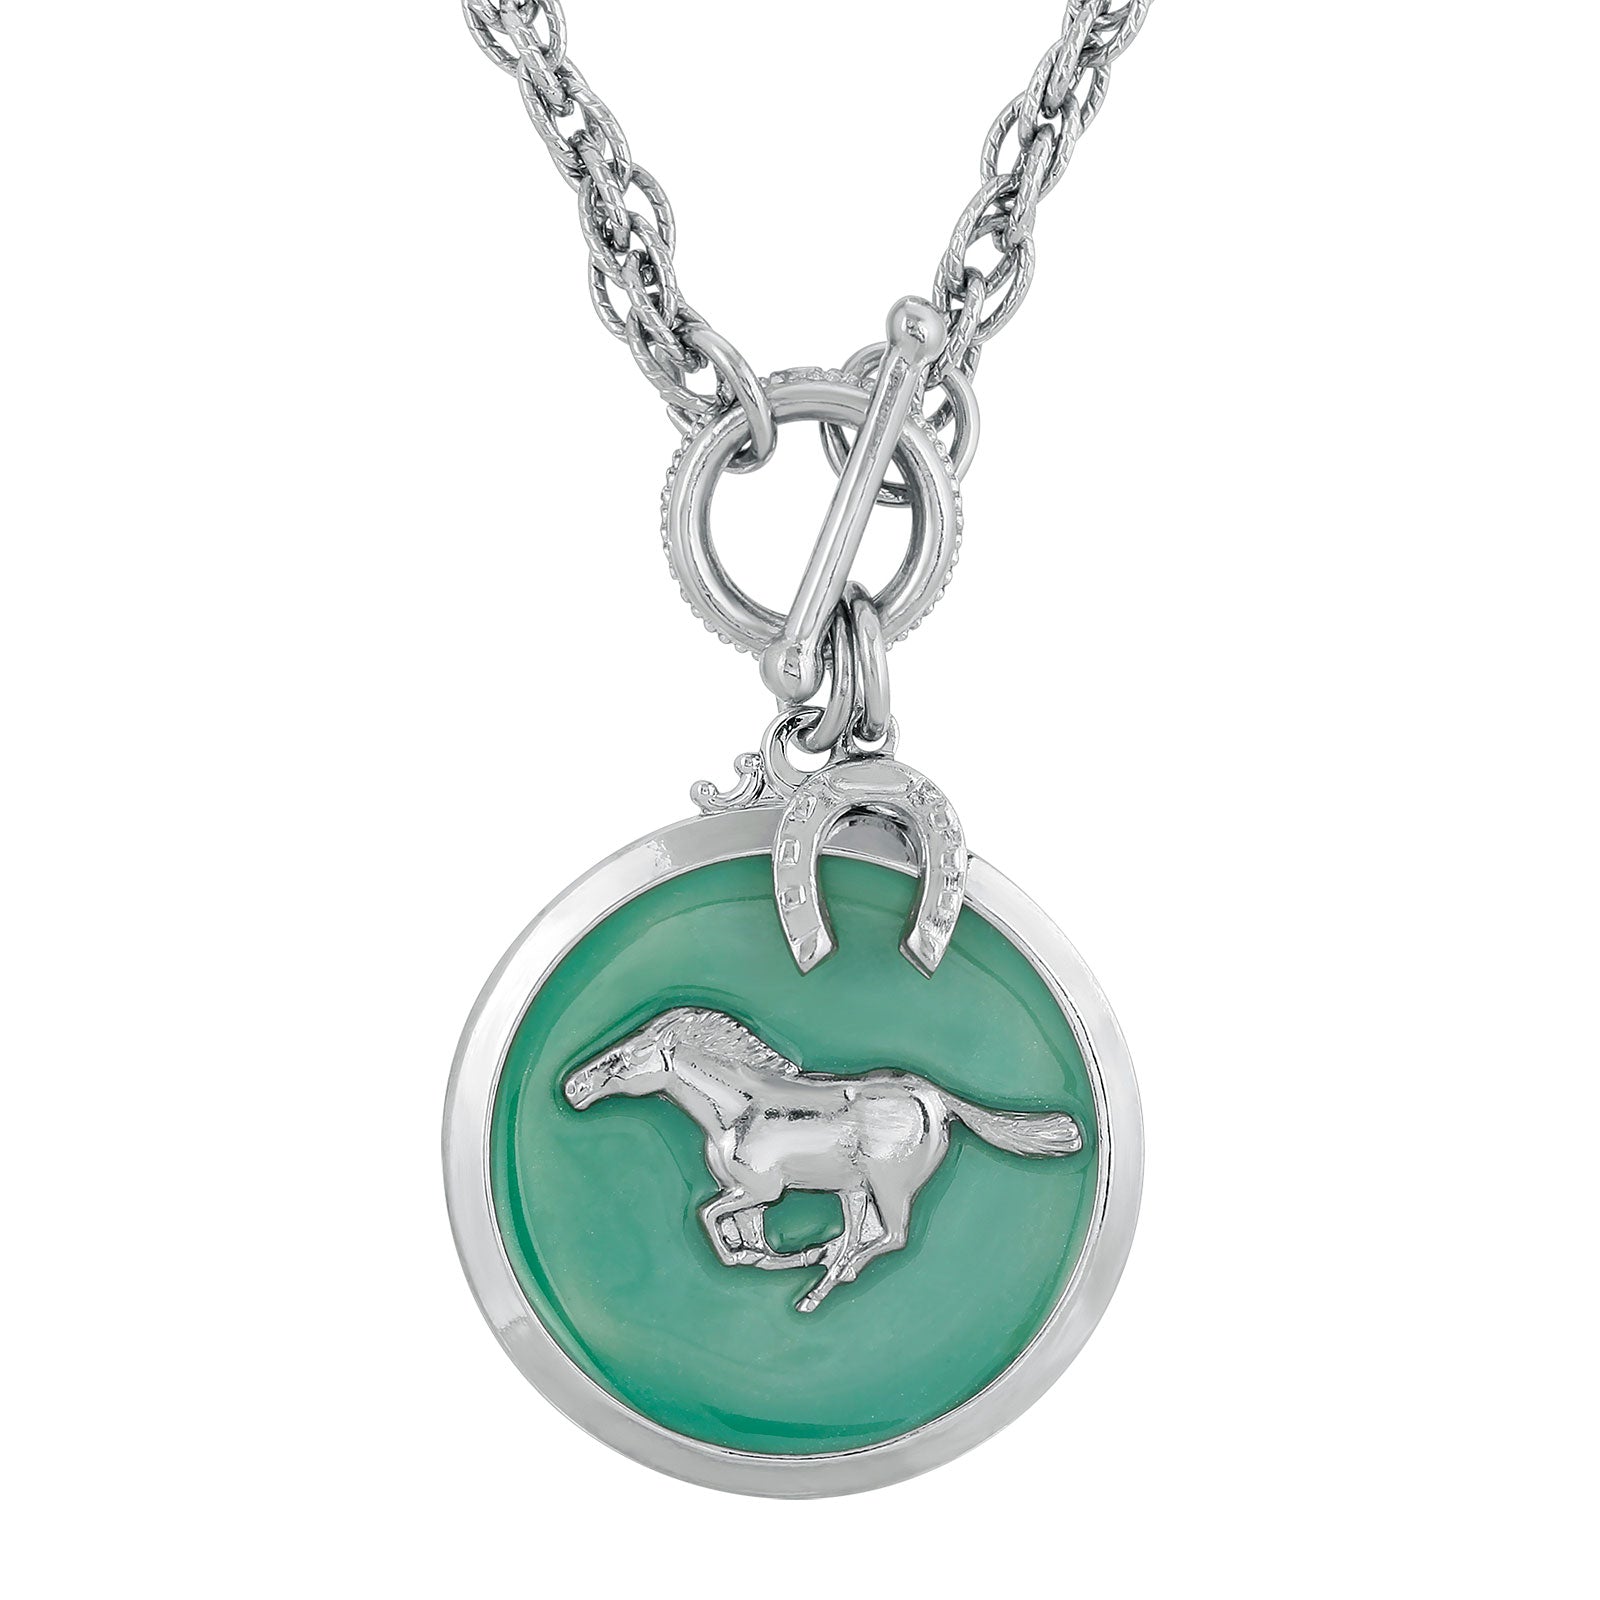 Silver-Tone Turquoise Color Enamel Horse Pendant Toggle Necklace 18